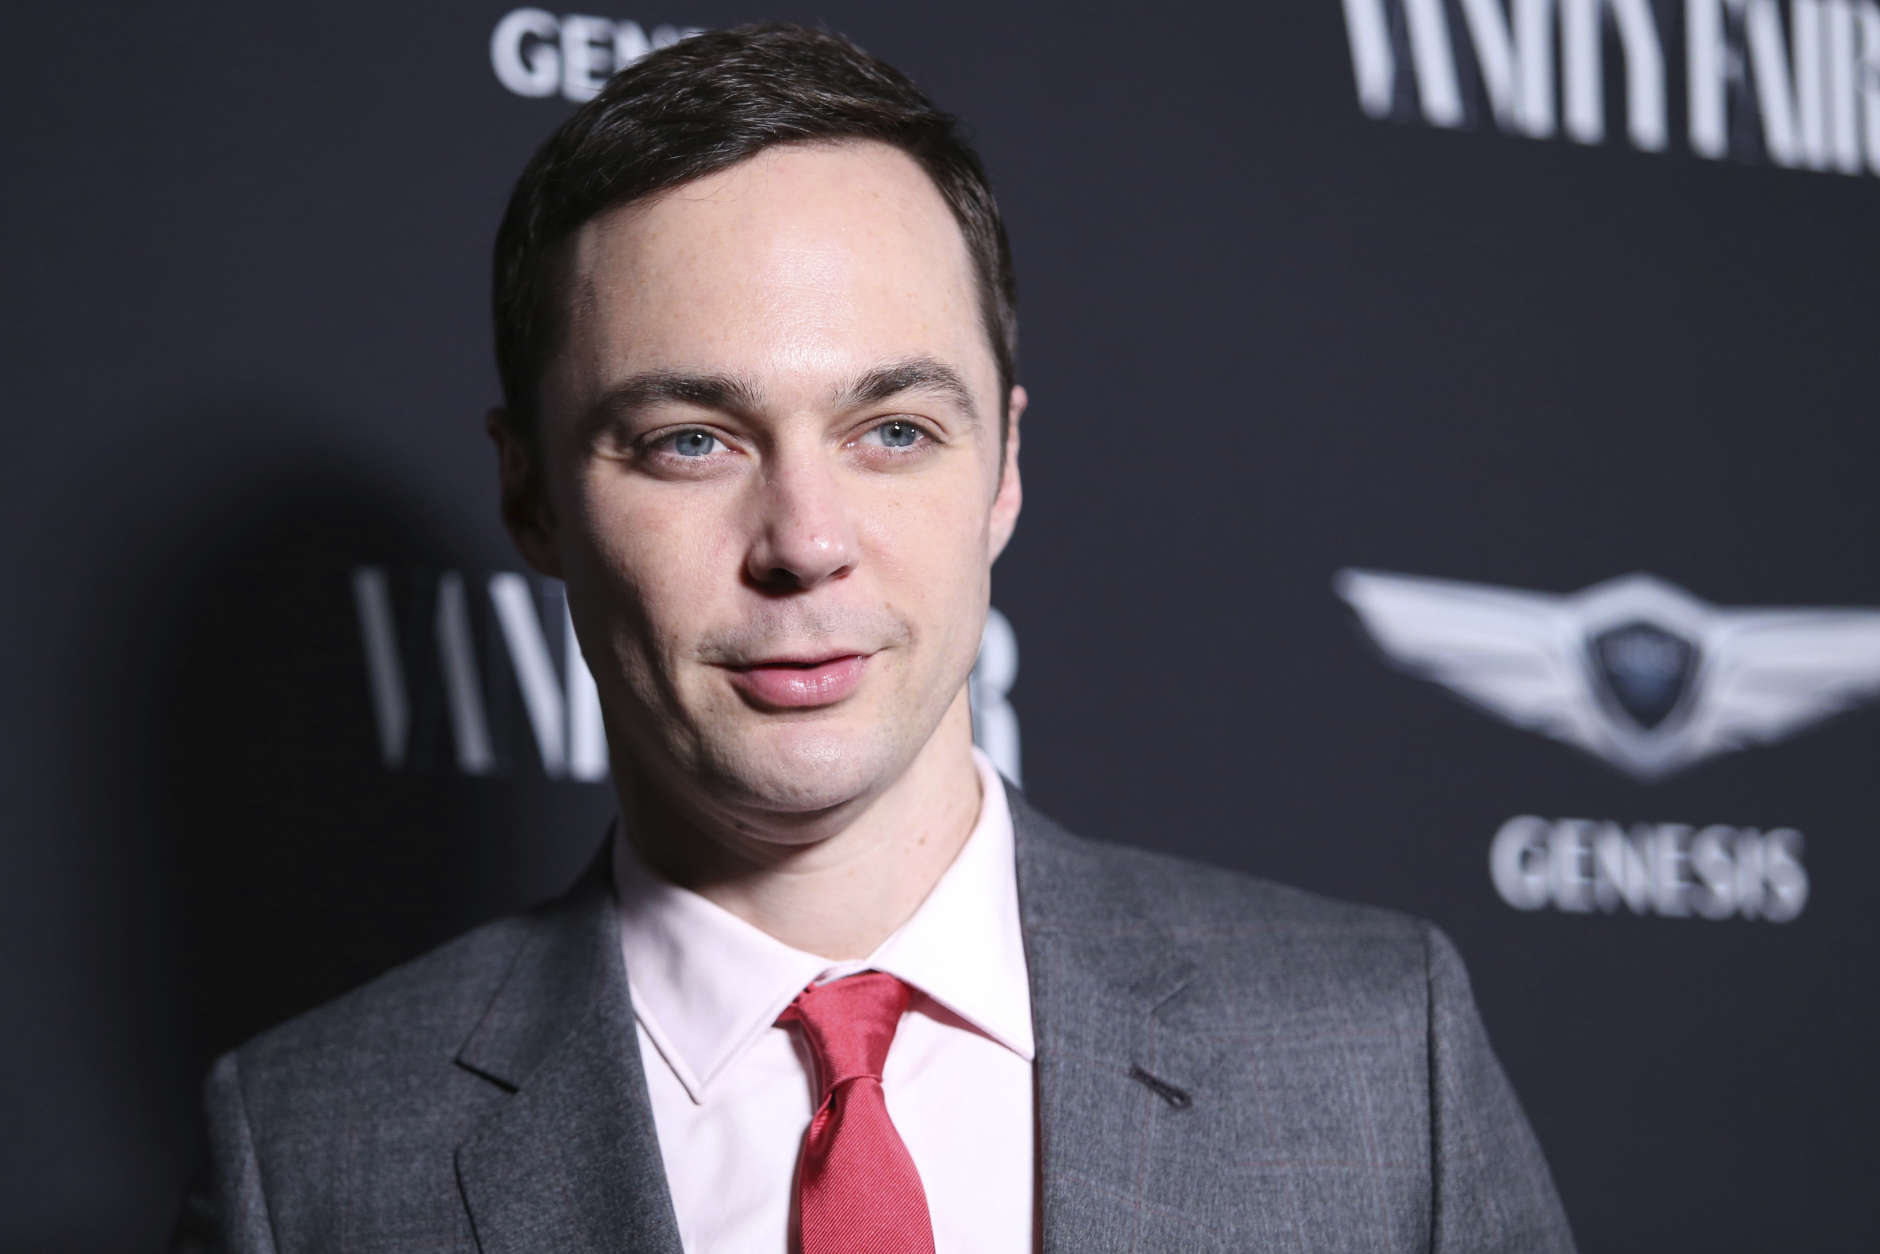 Actor Jim Parsons of "The Big Bang Theory" is 44 on March 24.(Photo by Omar Vega/Invision/AP)